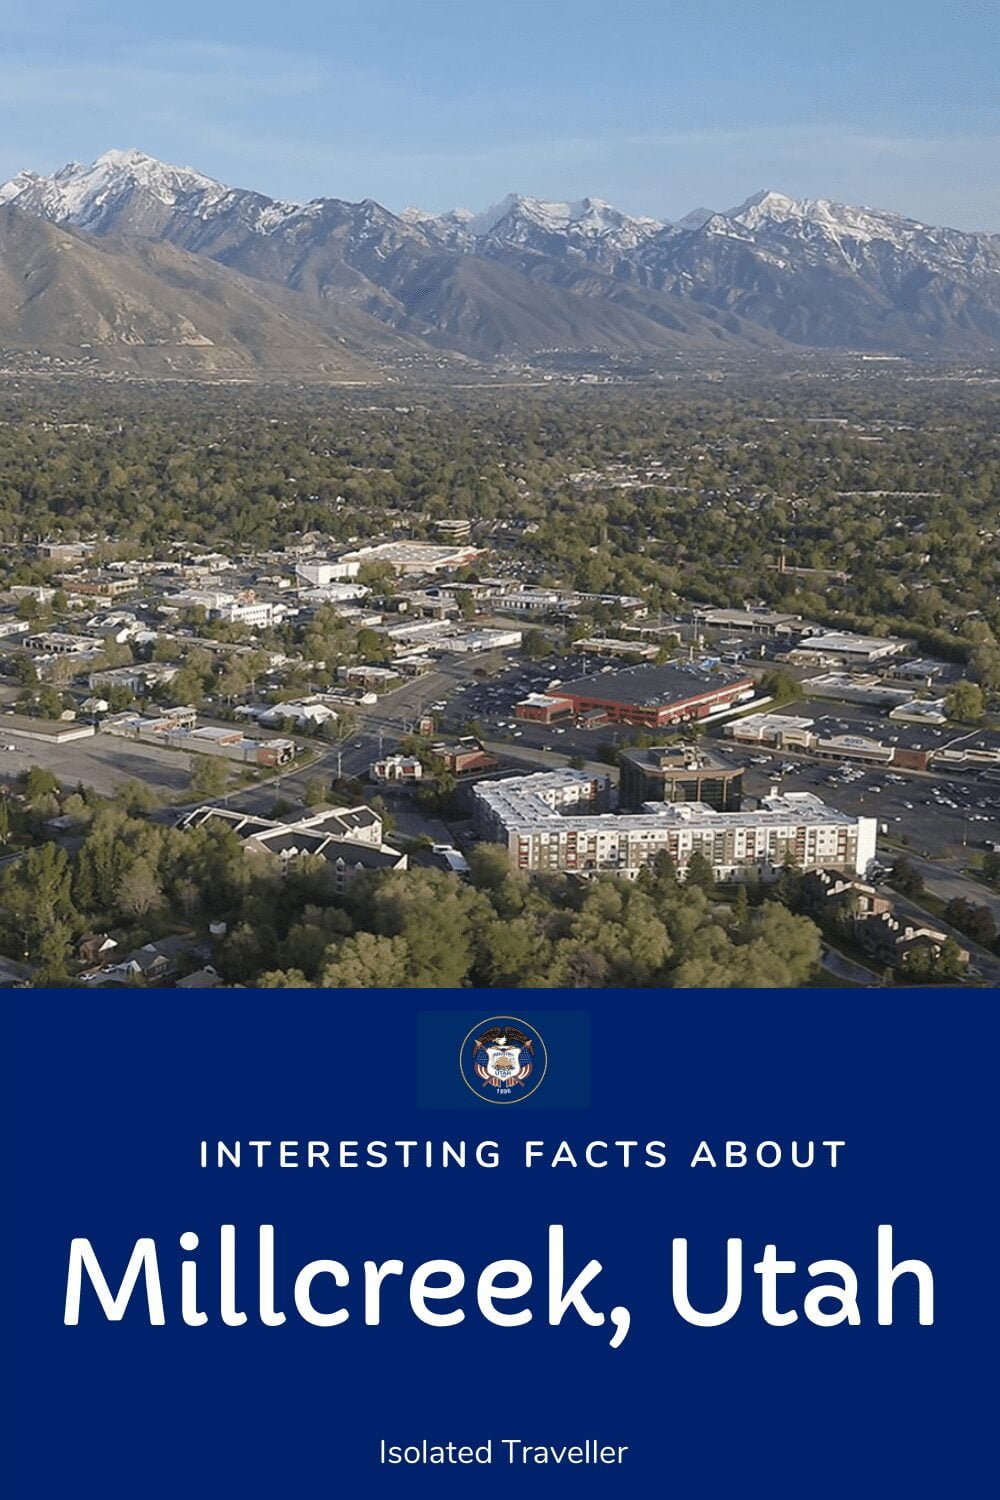 Facts About Millcreek, Utah